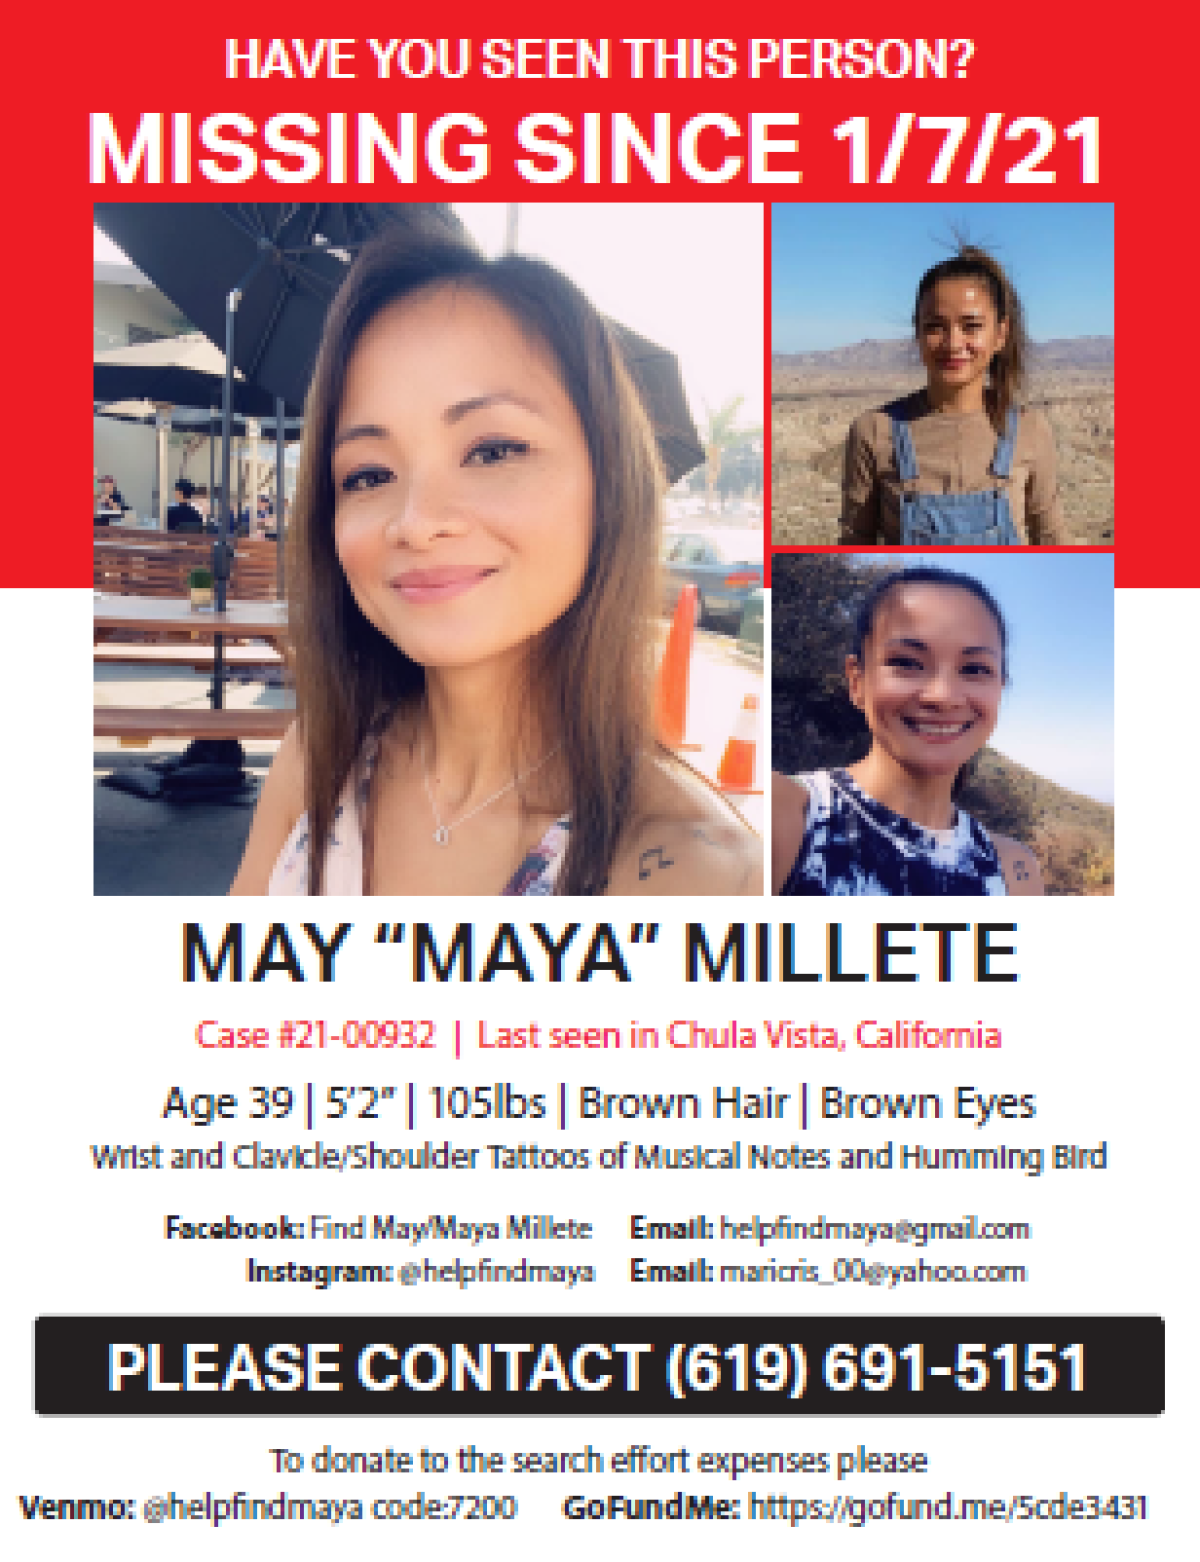 A flier about Maya "May" Millete, who vanished Jan. 7.